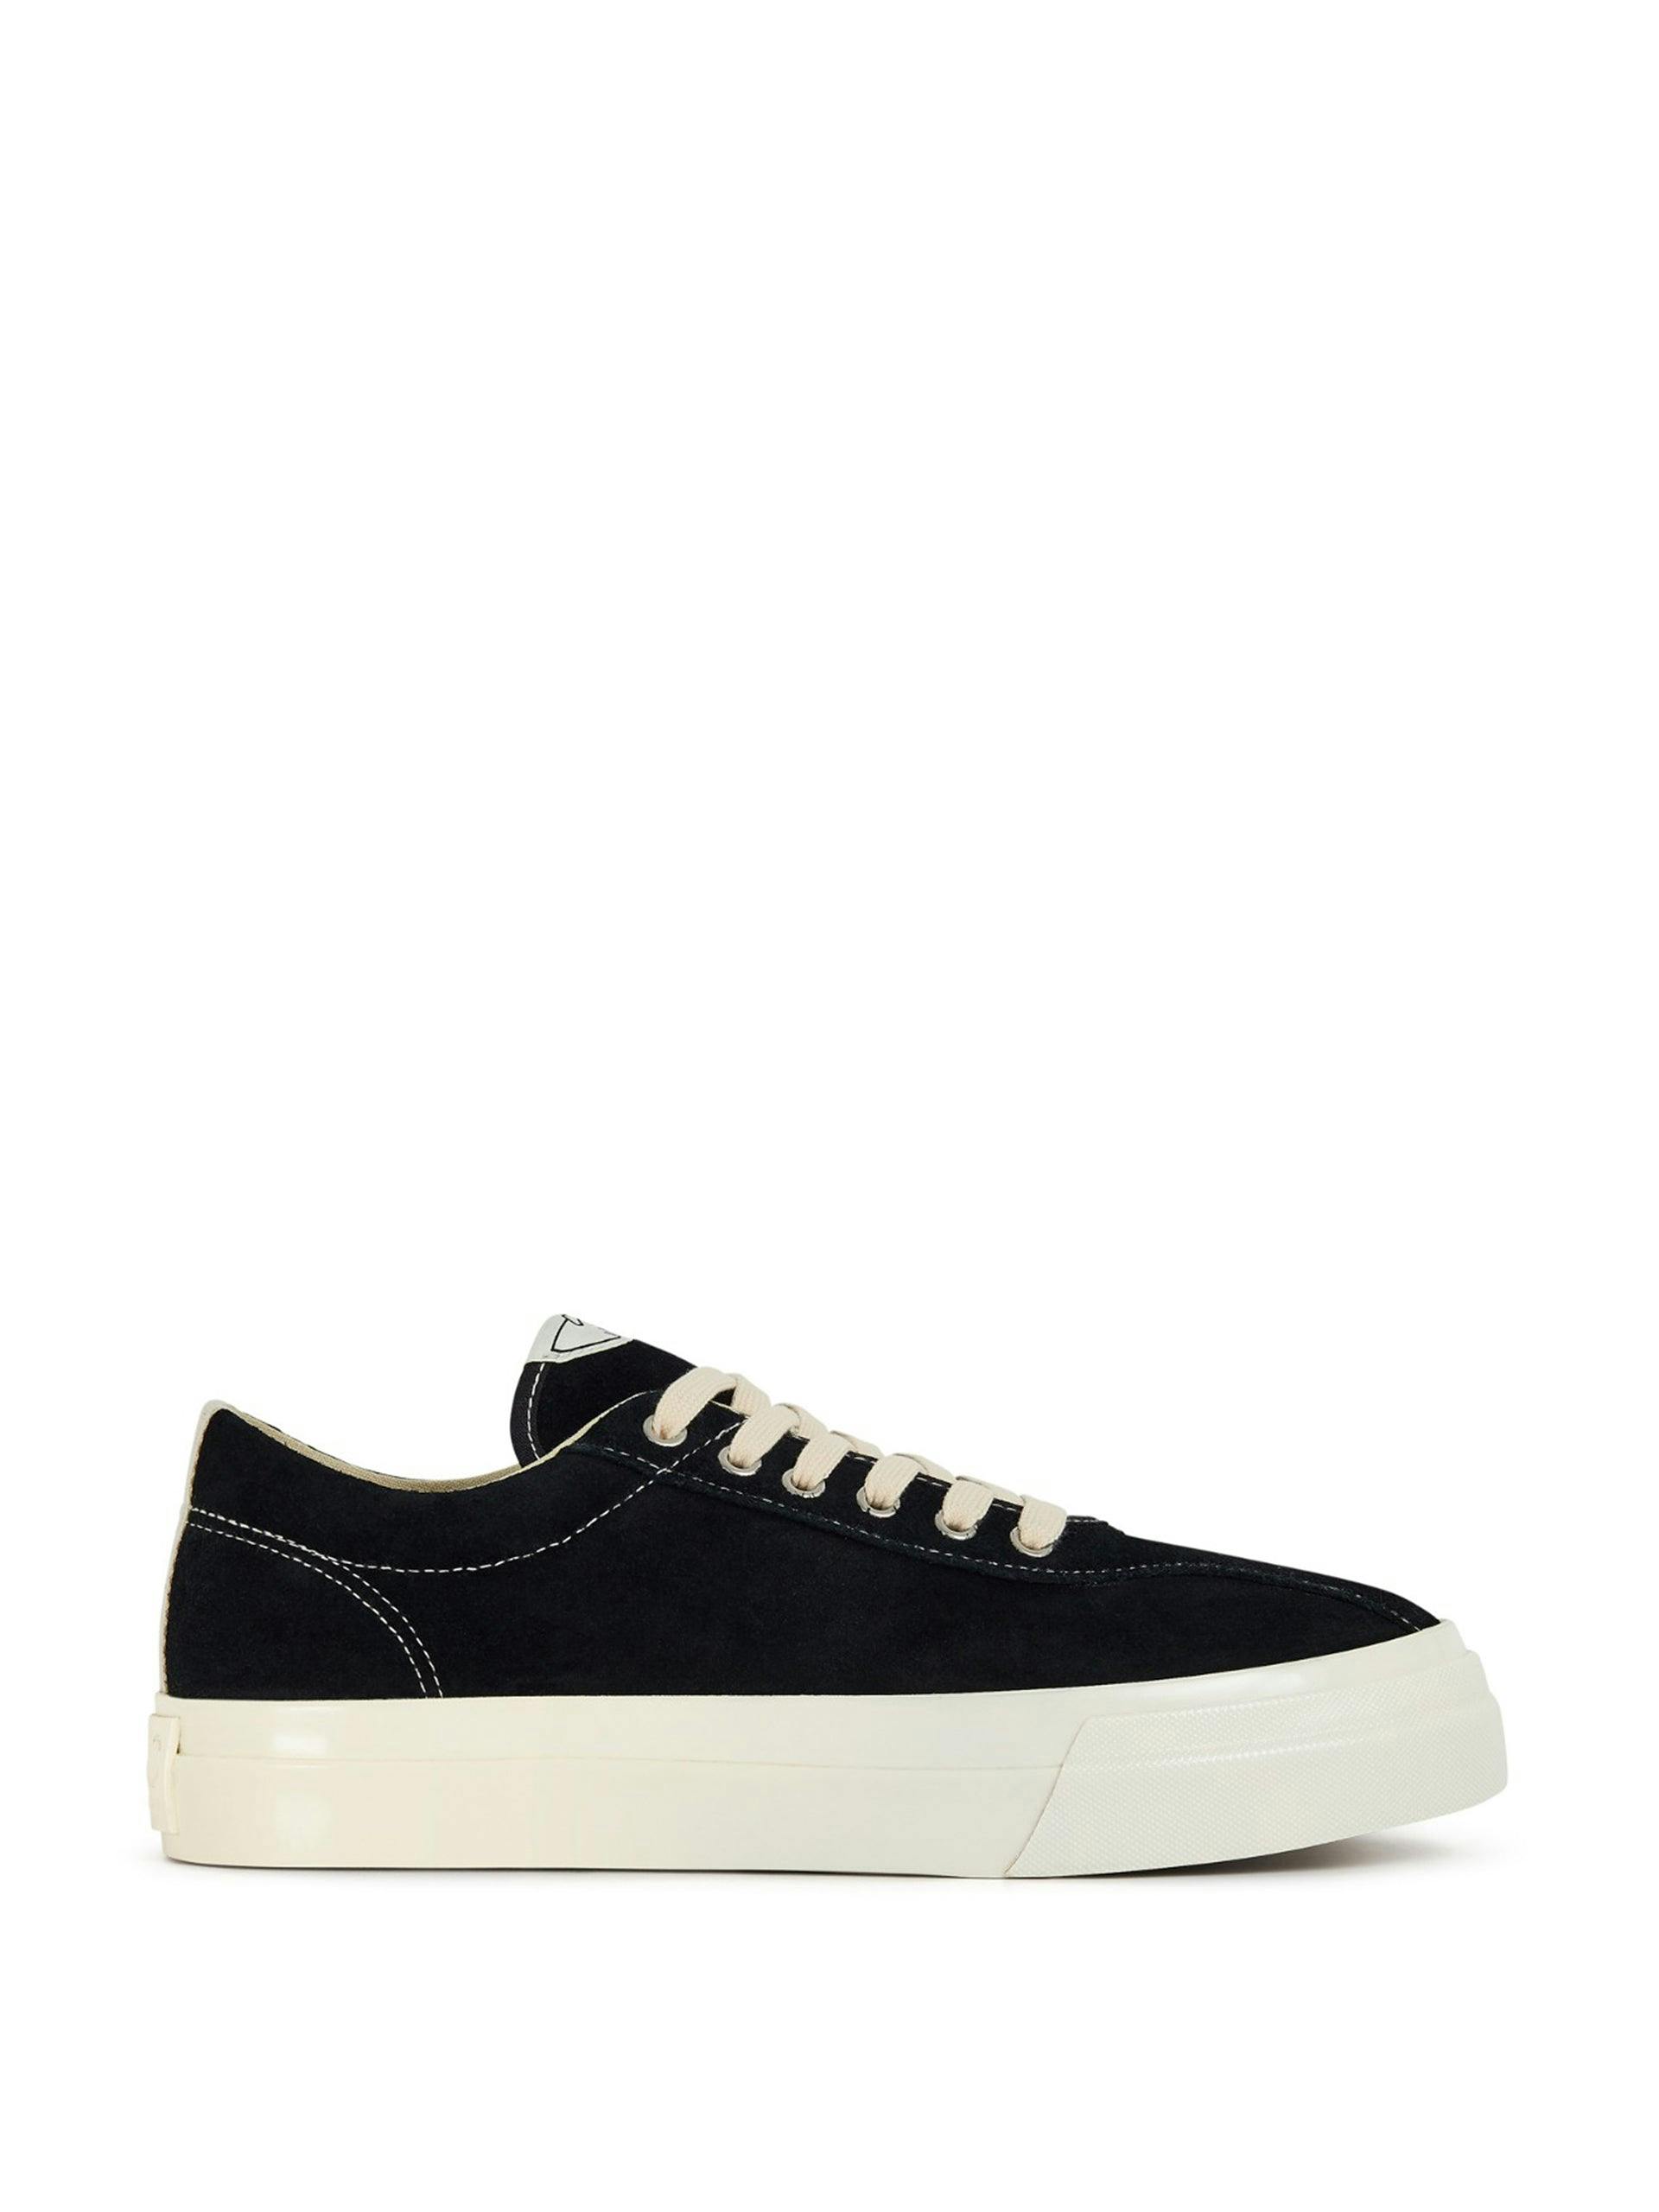 Black suede trainers